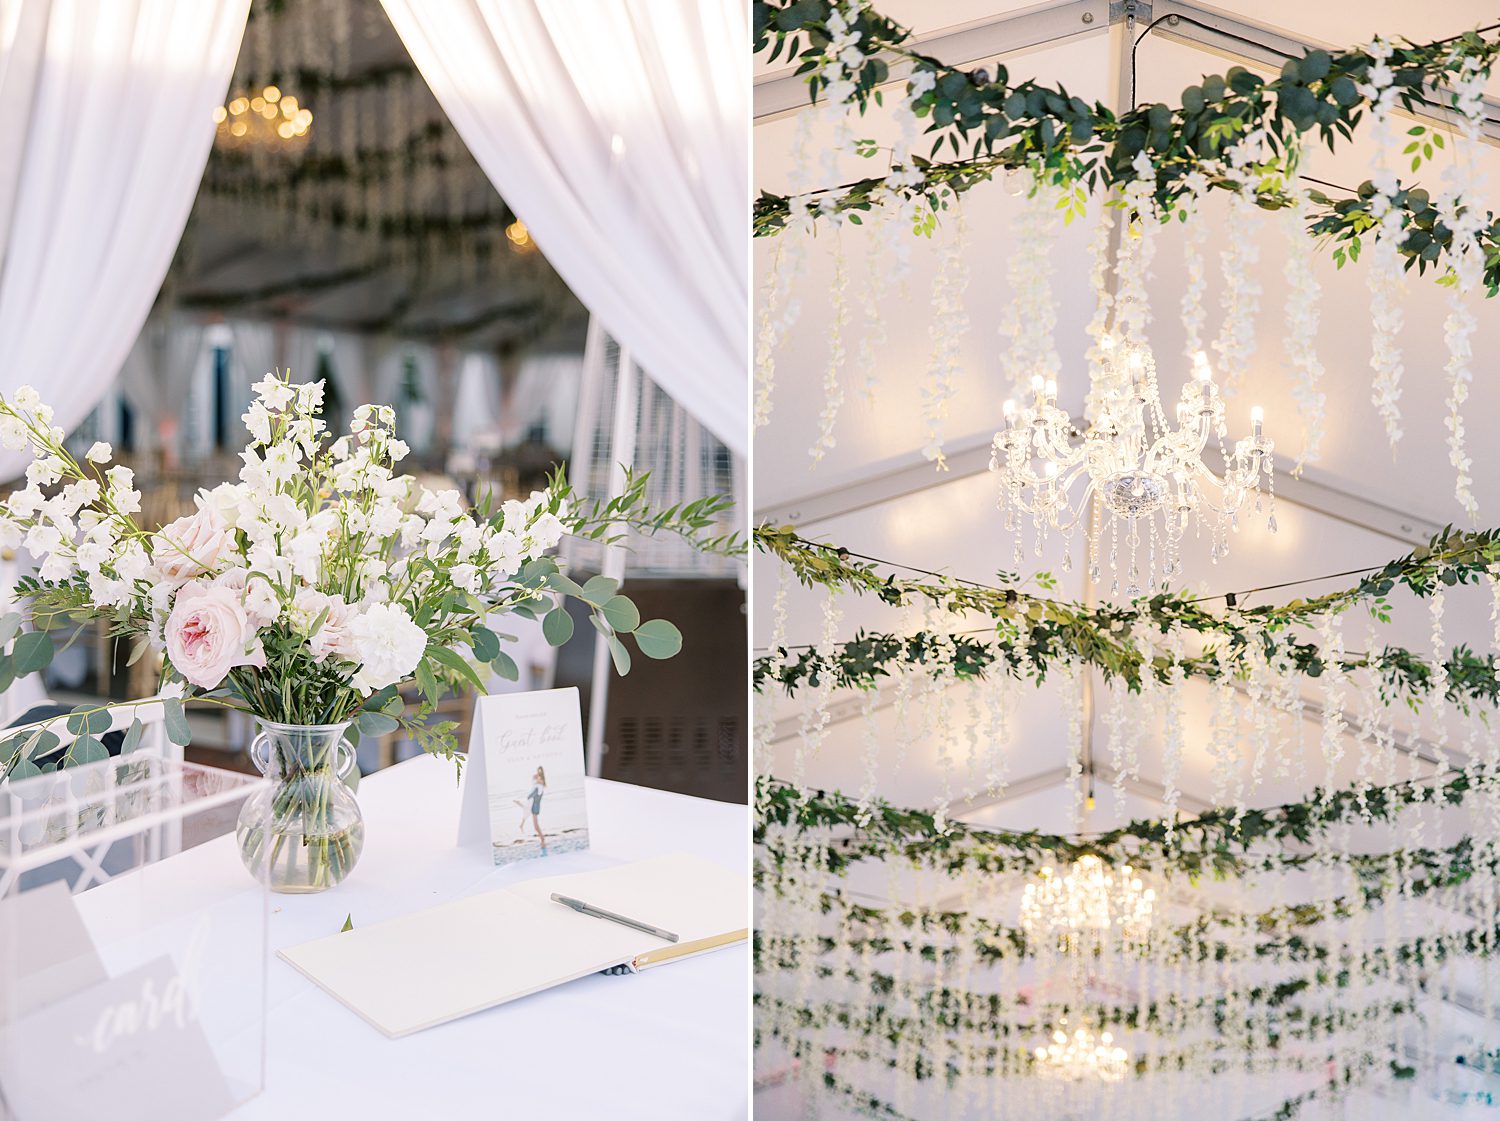 tented wedding reception with hanging greenery and white and pink flowers 